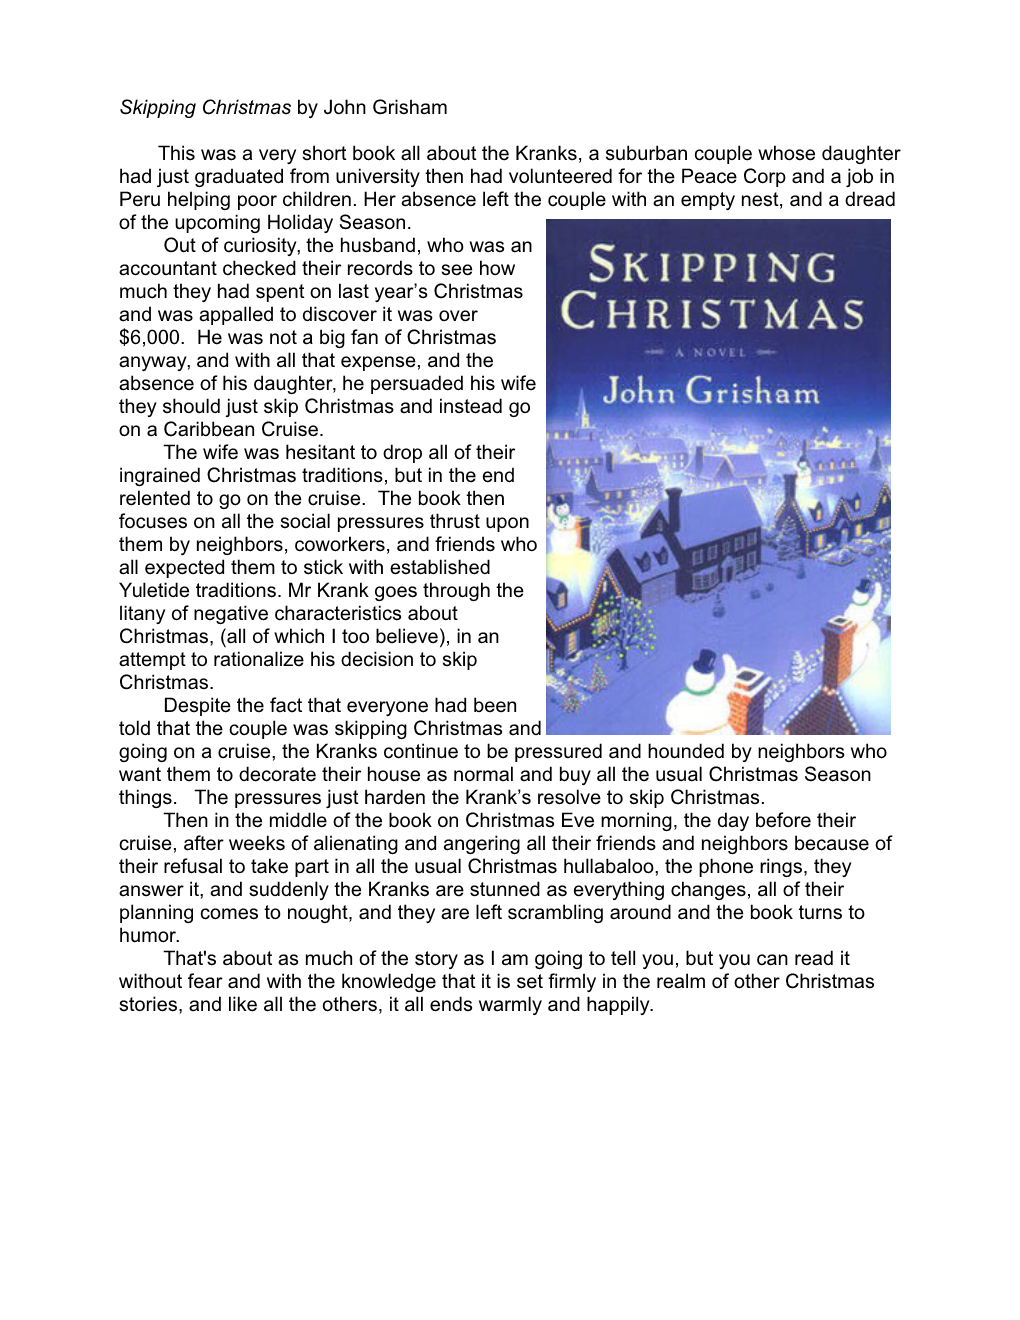 Skipping Christmas by John Grisham This Was a Very Short Book All About